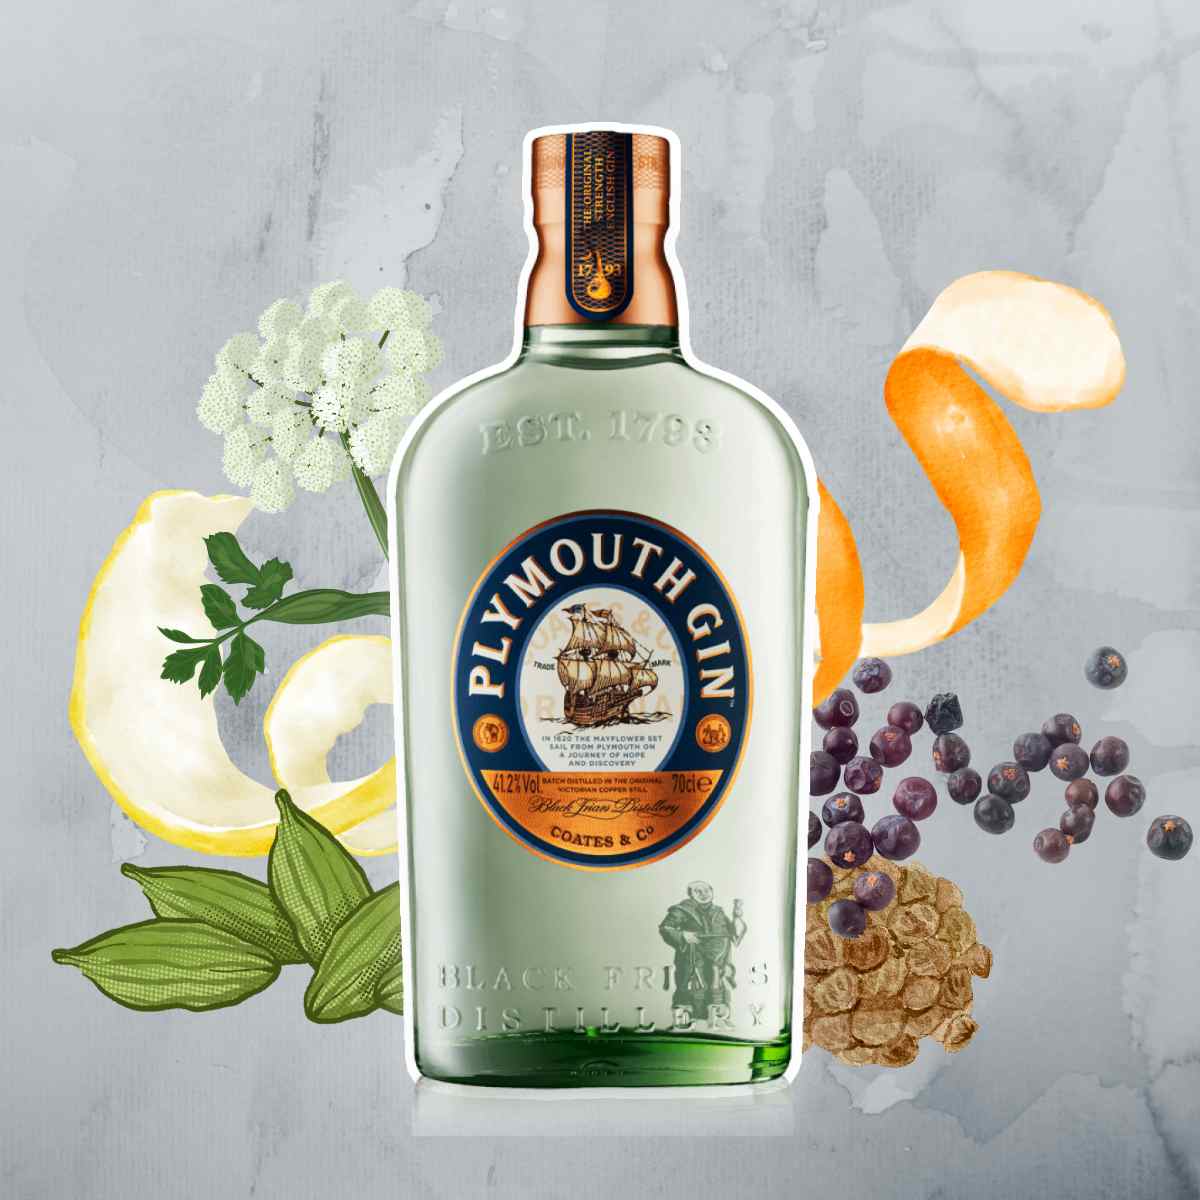 Plymouth Gin bottle and botanical ingredients on blue background